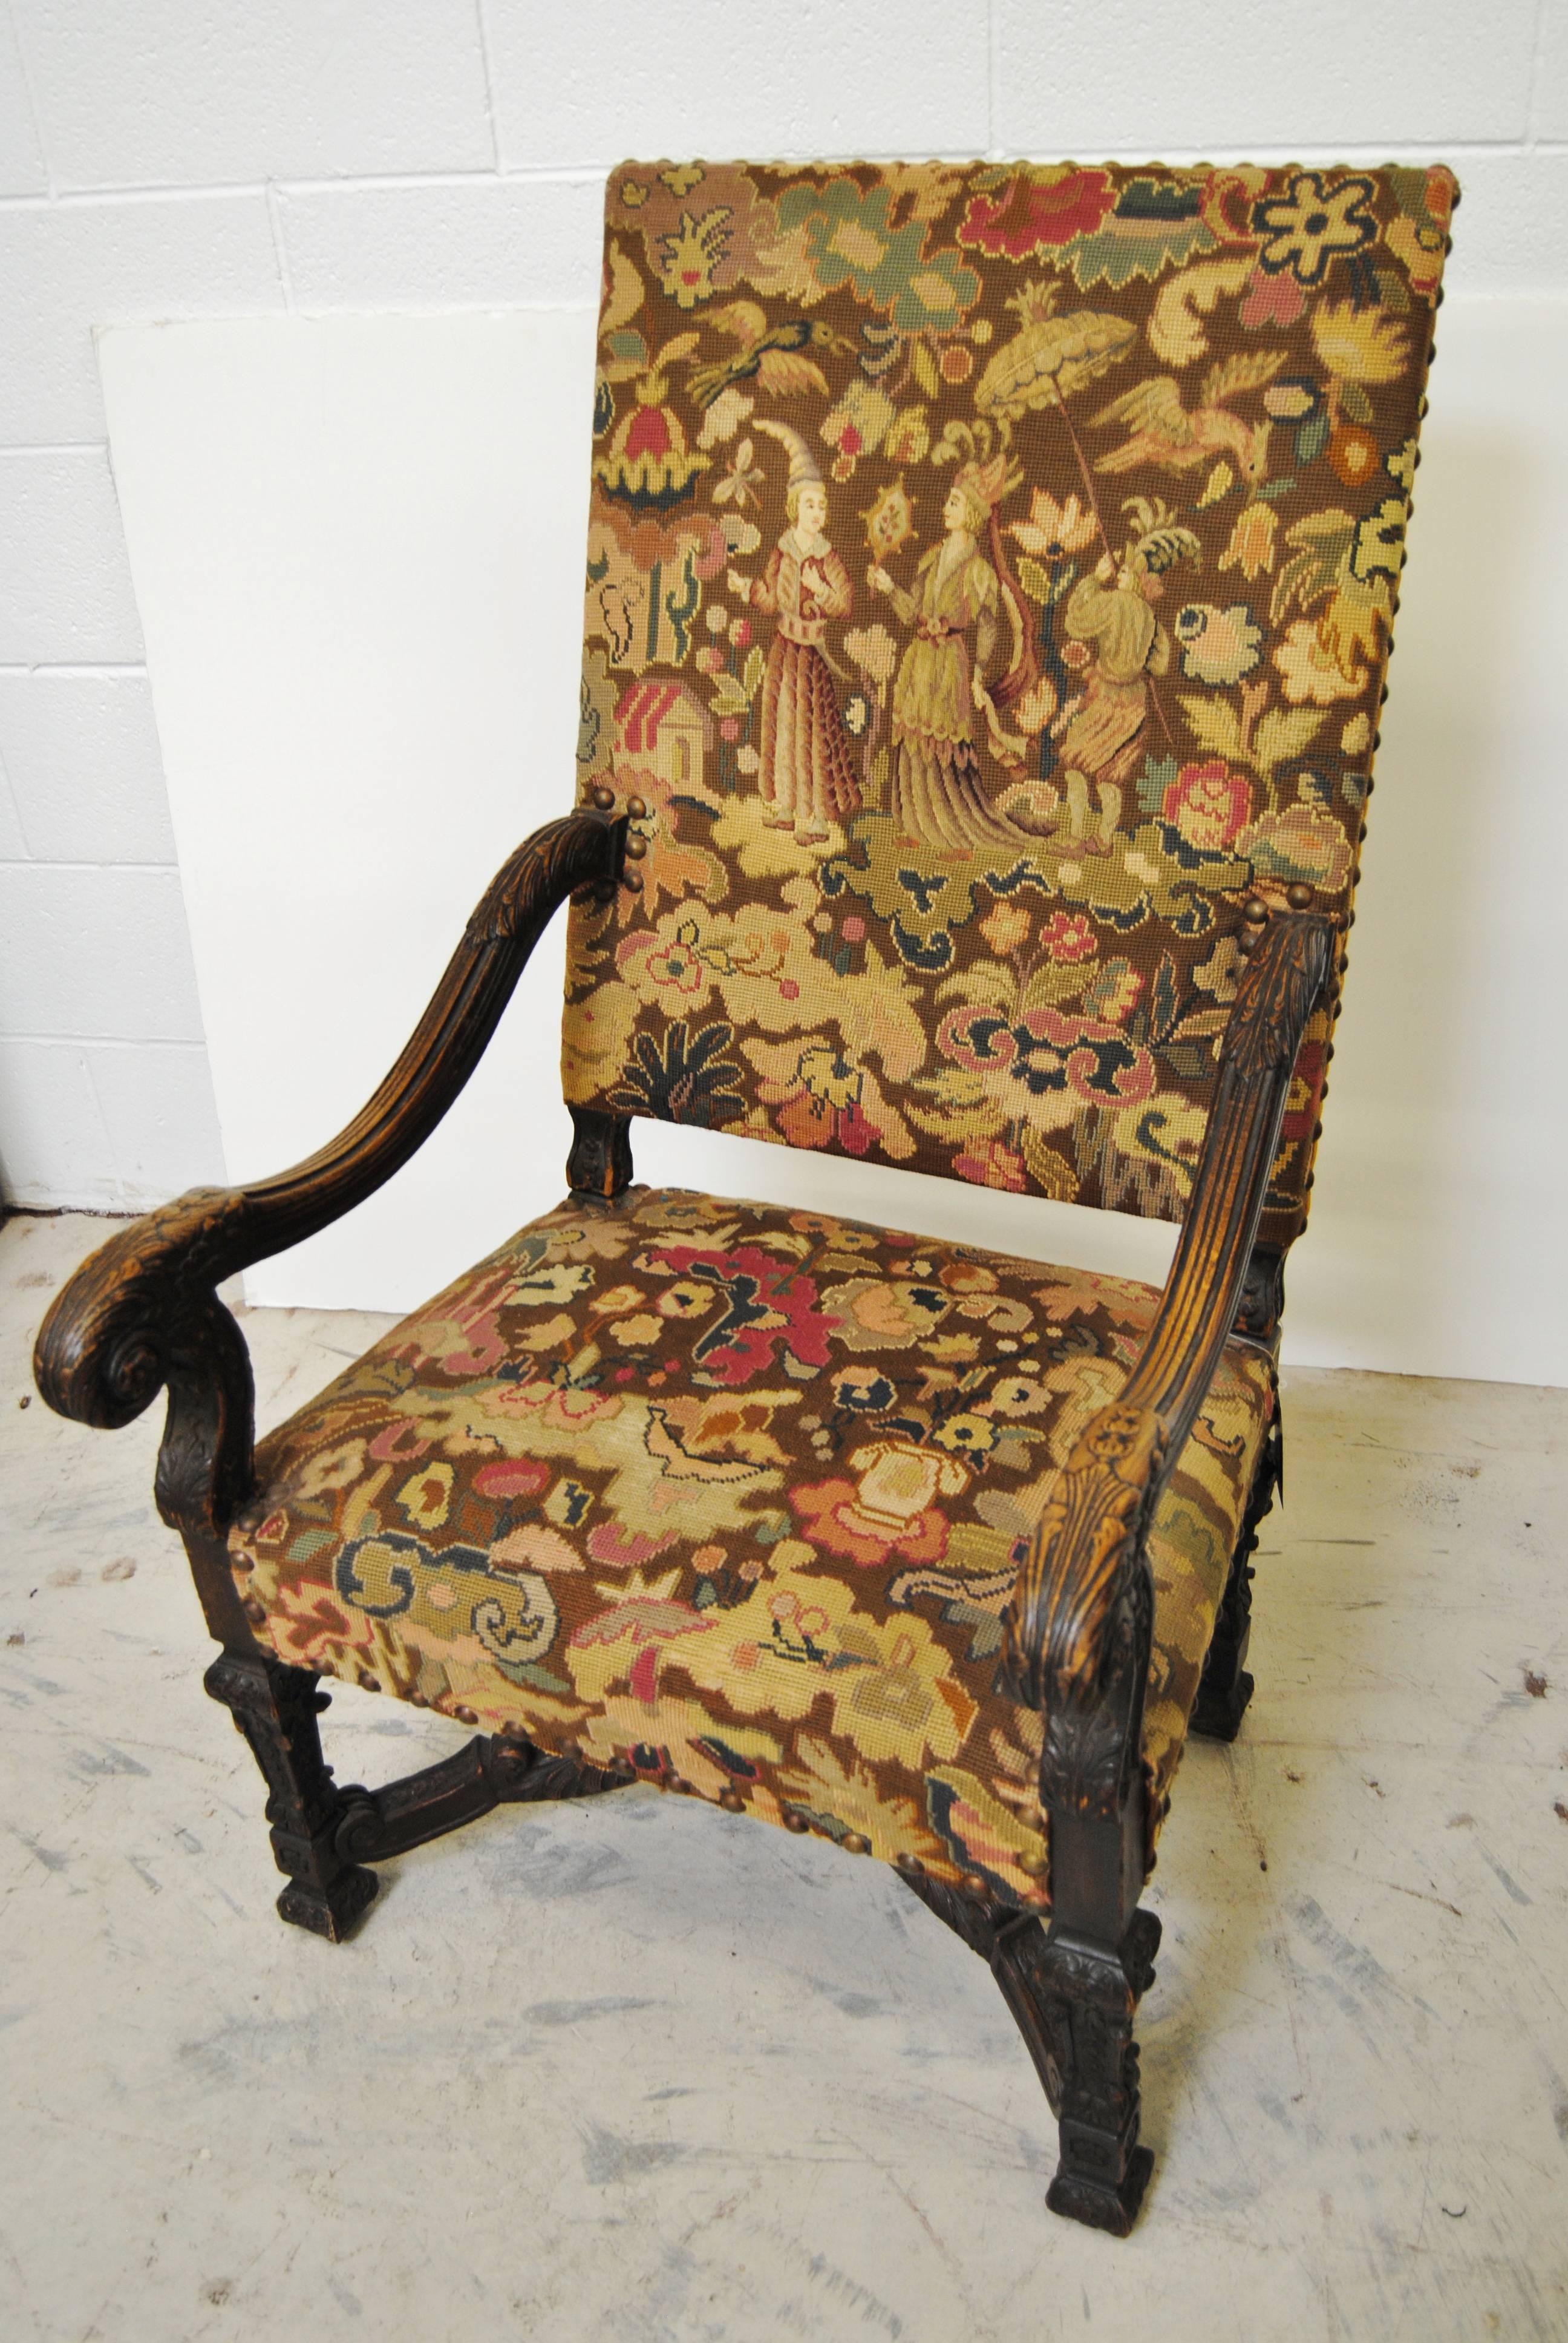 19th Century Antique French Chair with Original Needlepoint Upholstery For Sale